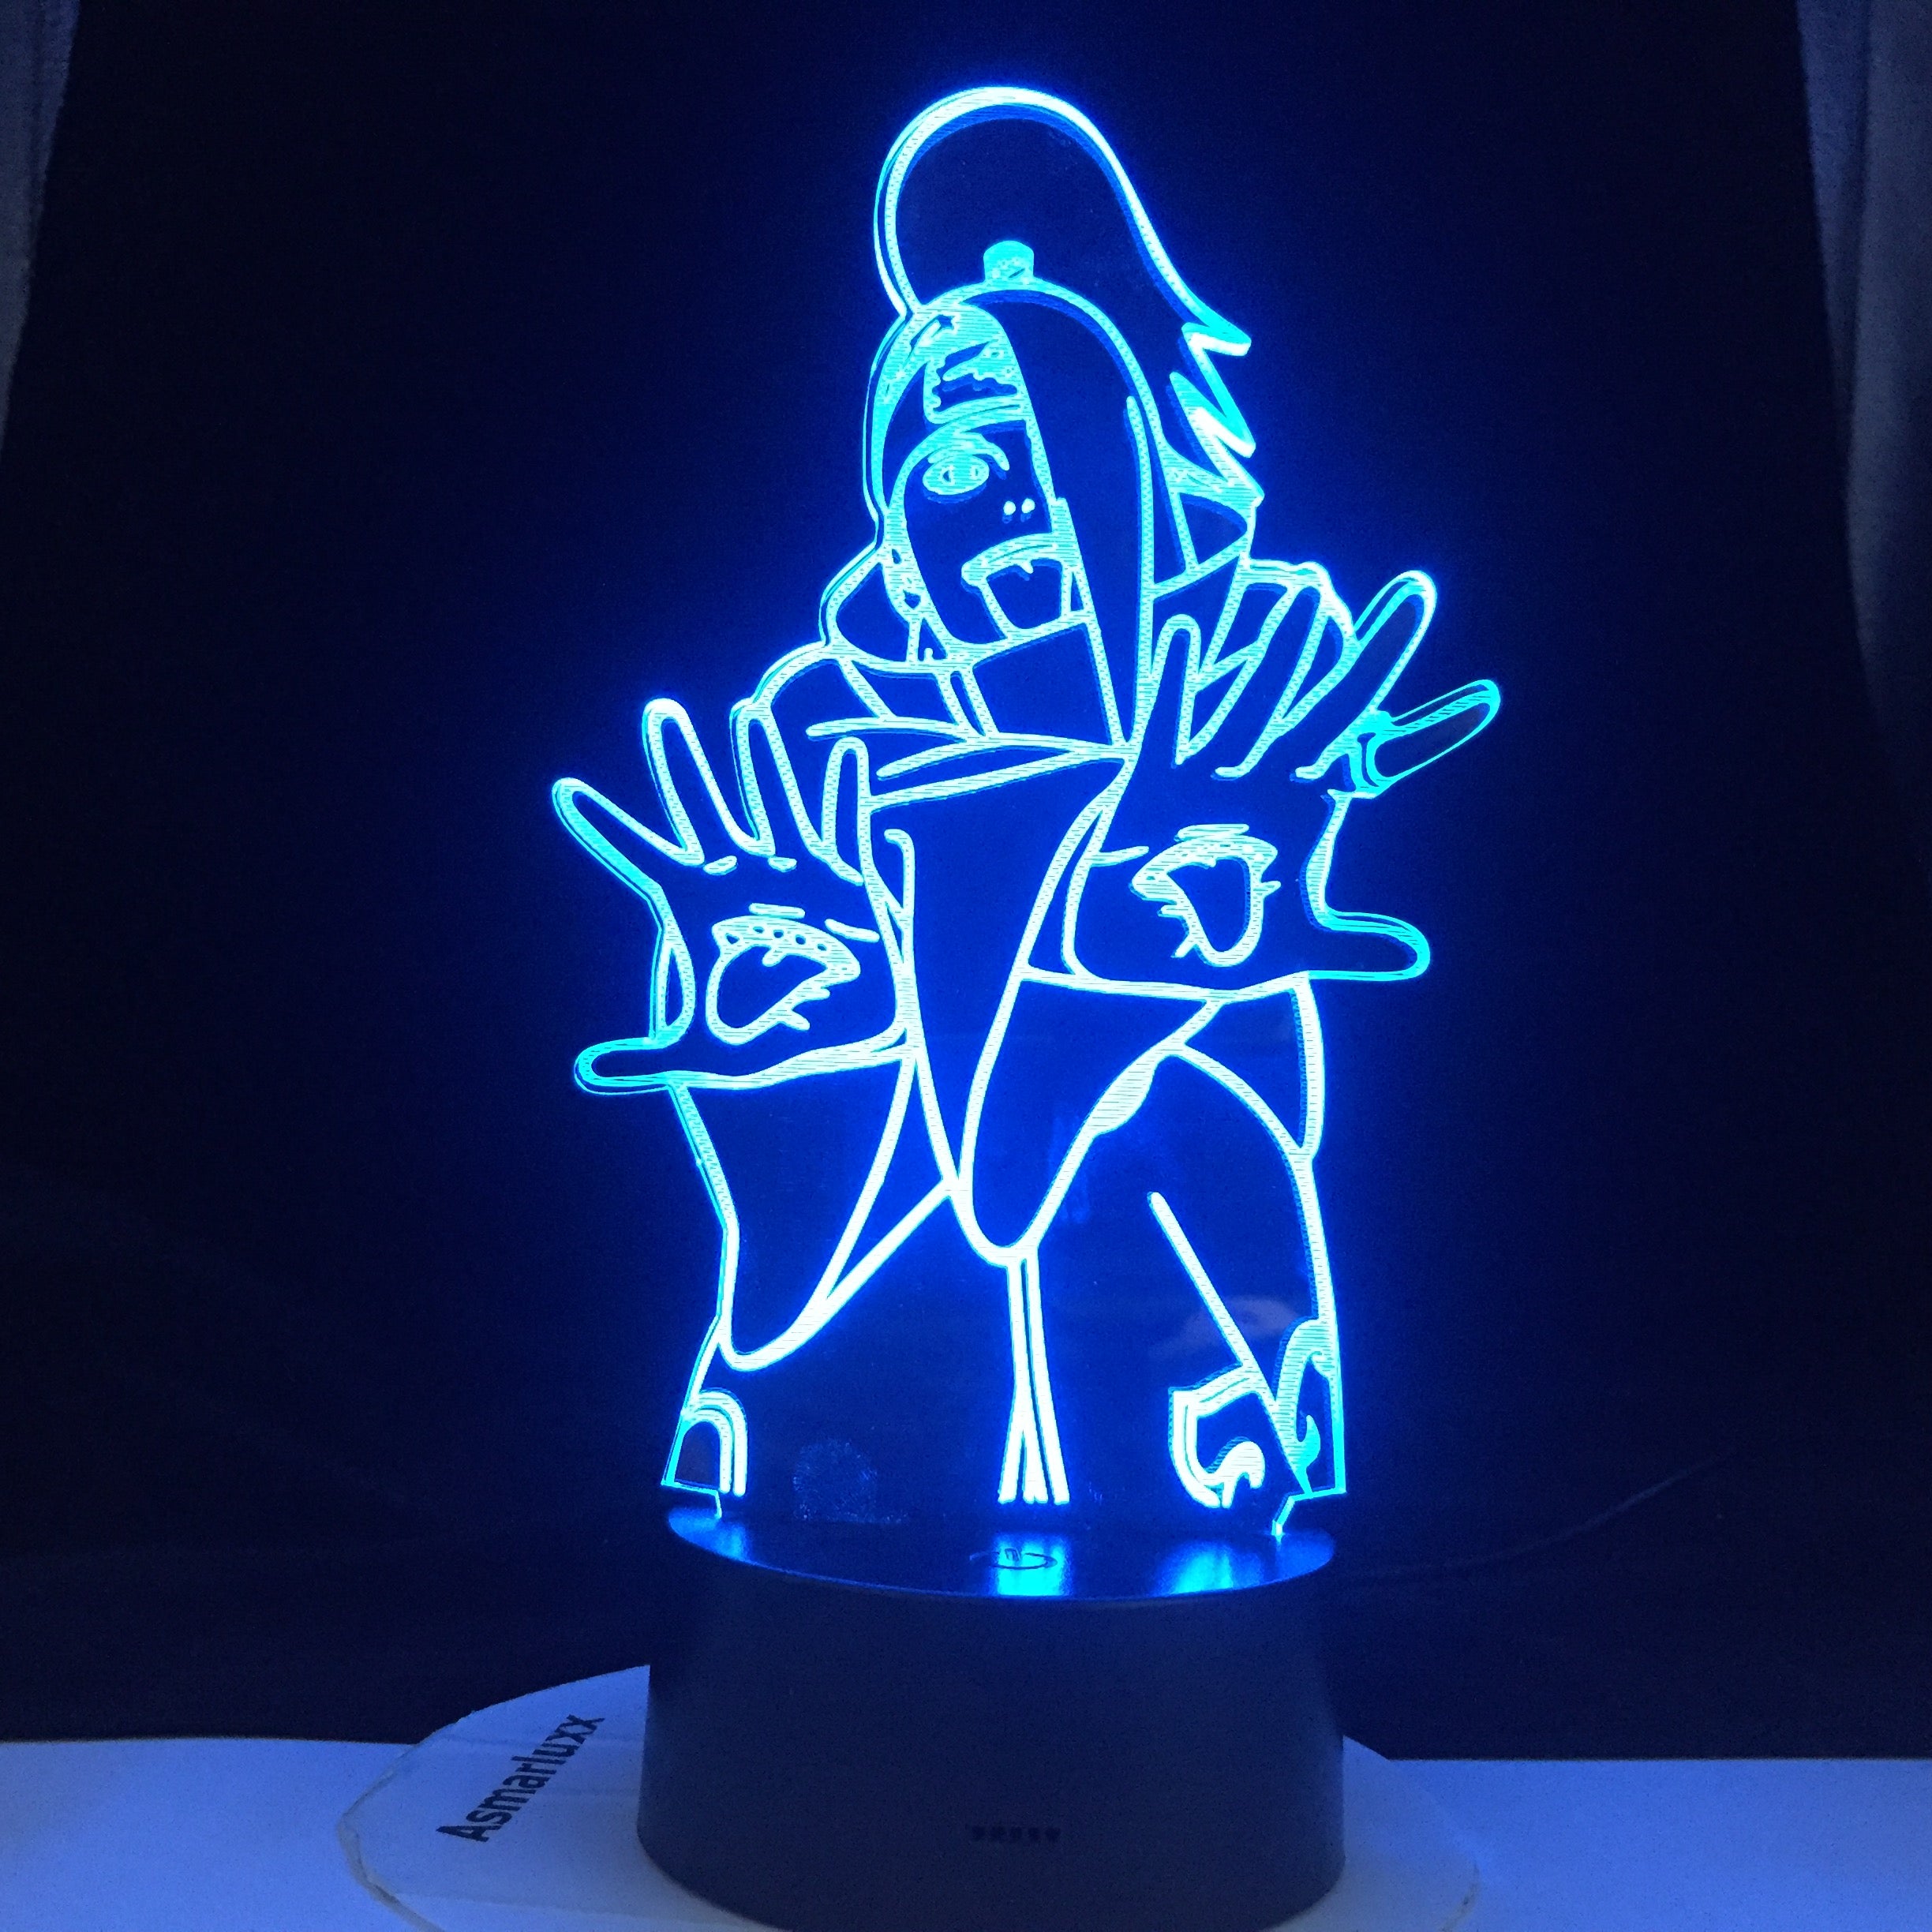 Deidara Anime Figure 3D LED Lamp one Bedroom Table Decoration Small Night Light for Children's Festival Birthday Gifts 7 Color Changes With Remote Control Night Light